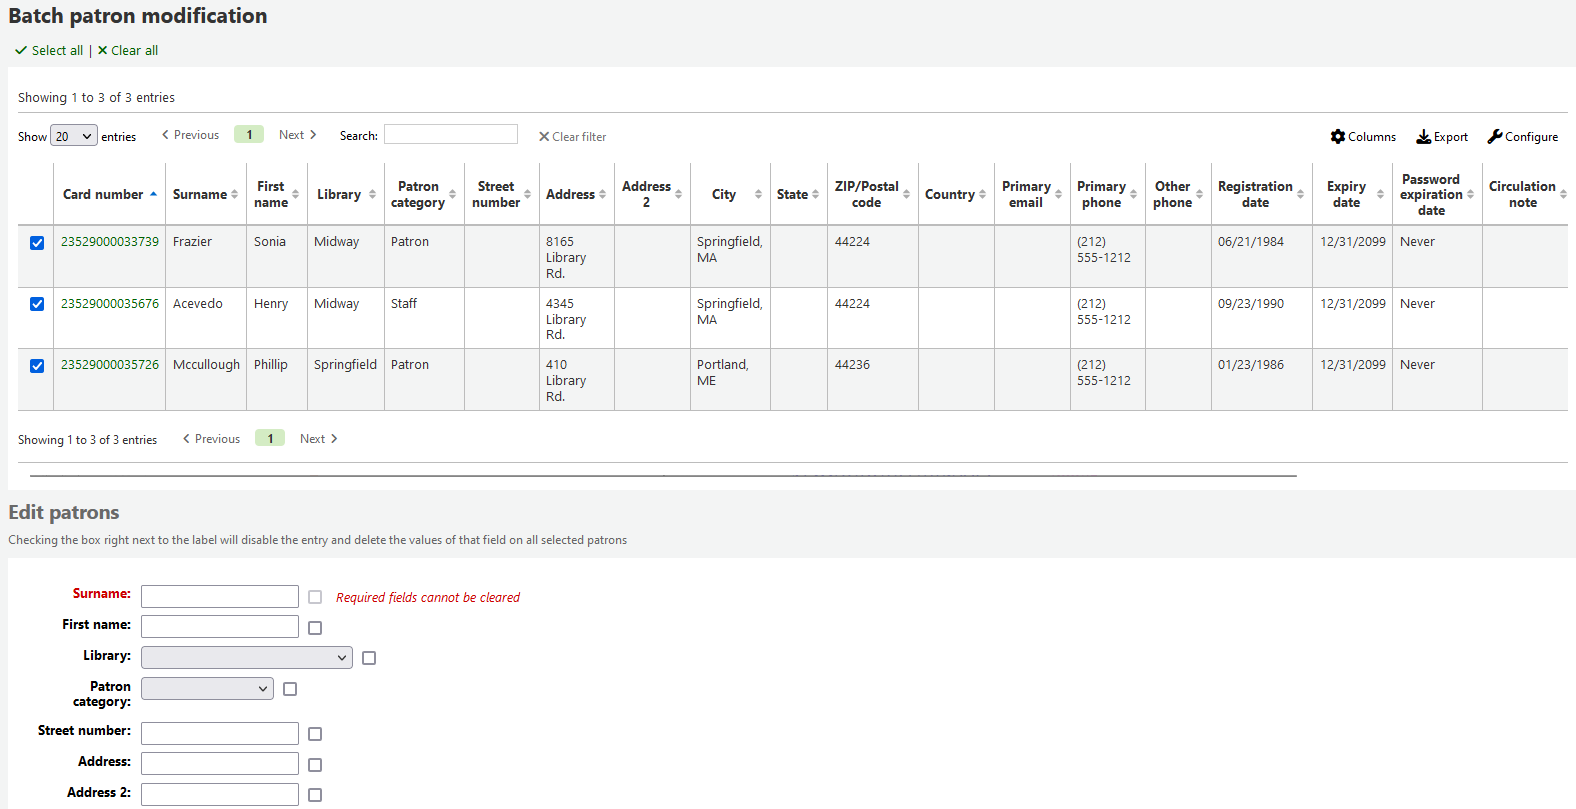 Batch patron modification form showing three selected patrons to modify and some of the editable fields below